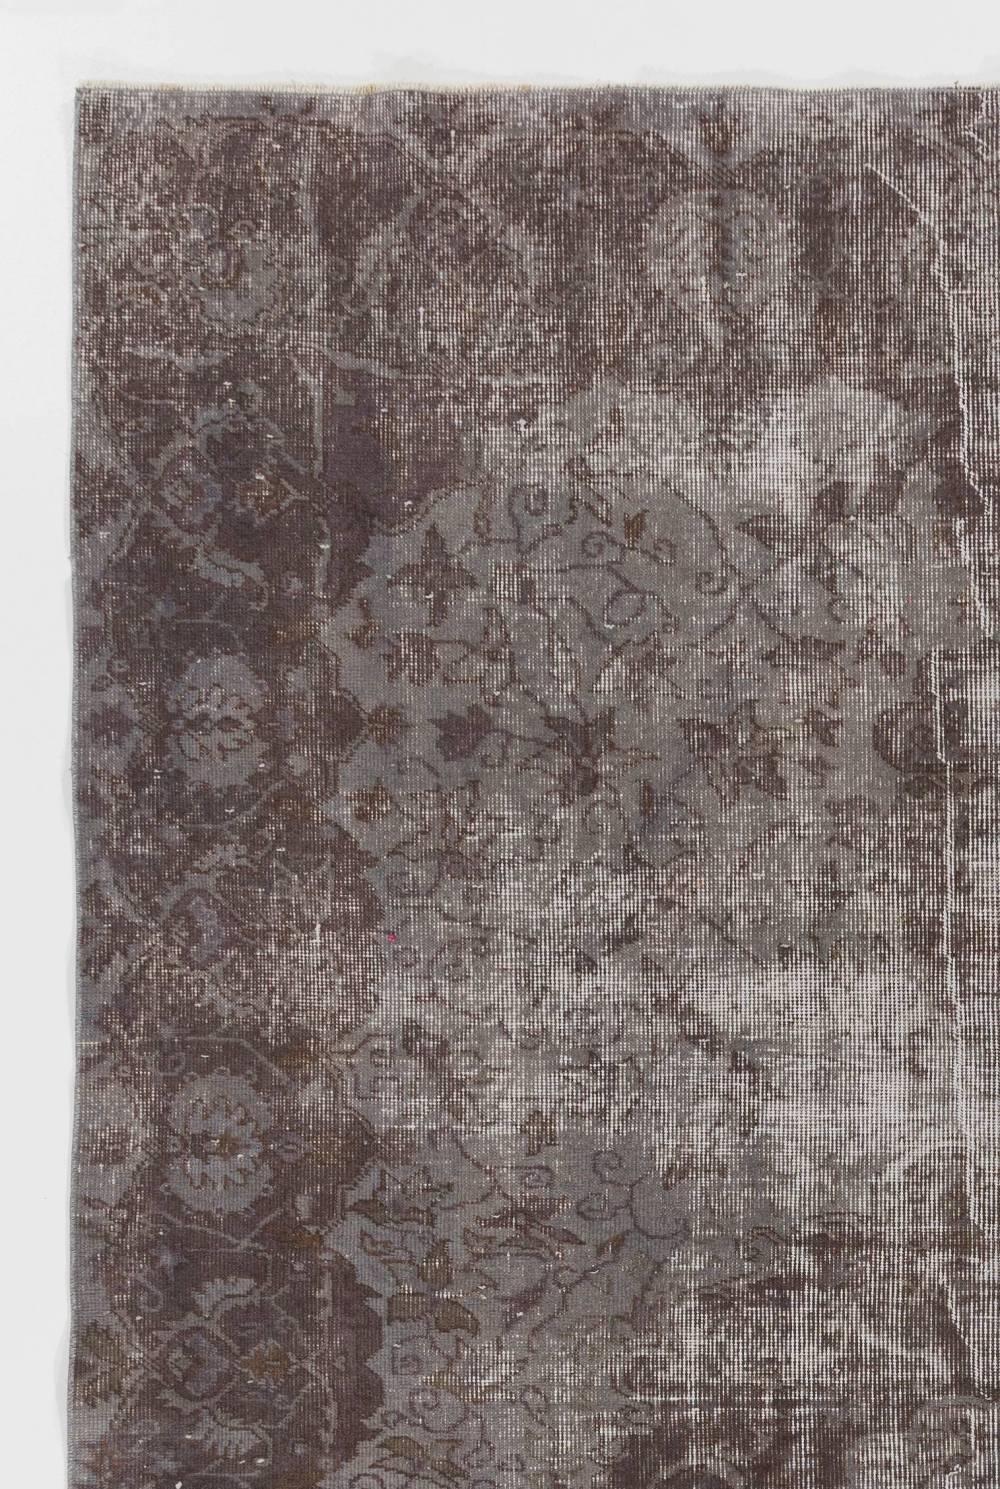 A vintage handmade Turkish rug over-dyed in taupe and gray featuring a medallion design against a field decorated with scrolling leafy vines. The rug is finely hand-knotted and has distressed low wool pile on cotton foundation. It is deep-washed, in